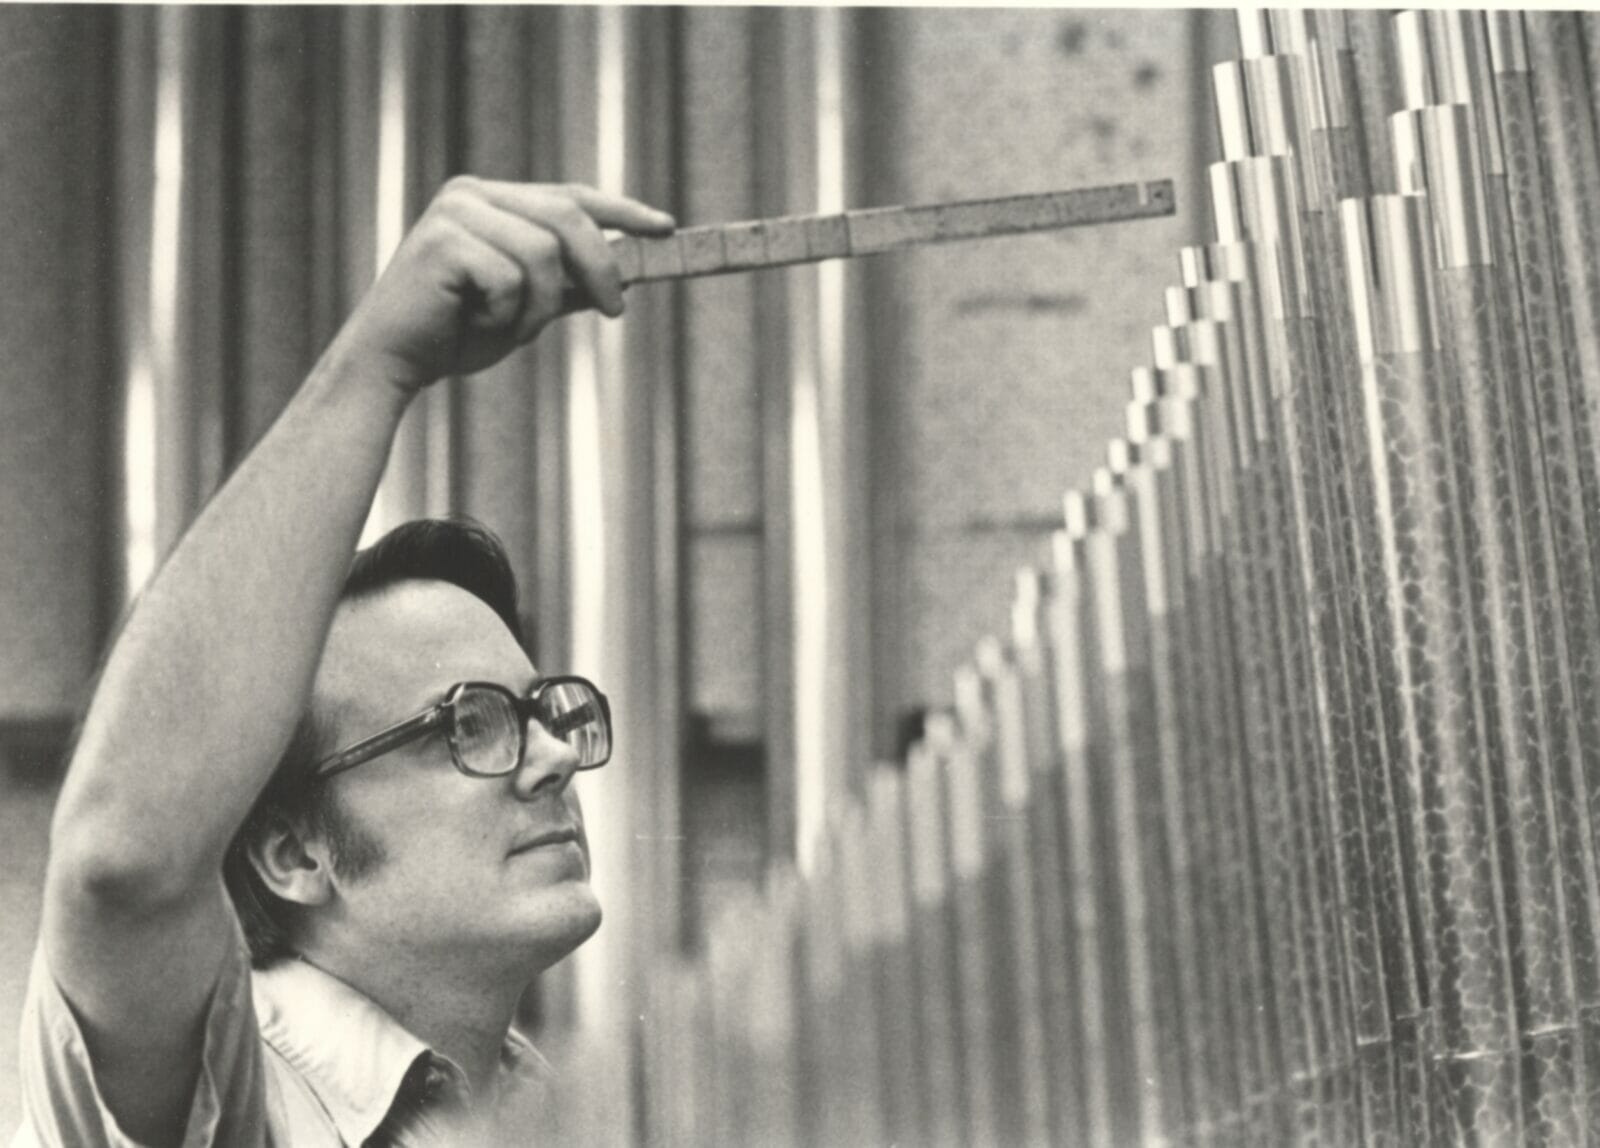 Black and white photo of a man with old, thick glasses holding a tuning instrument up to a row of organ pipes, in front of him.